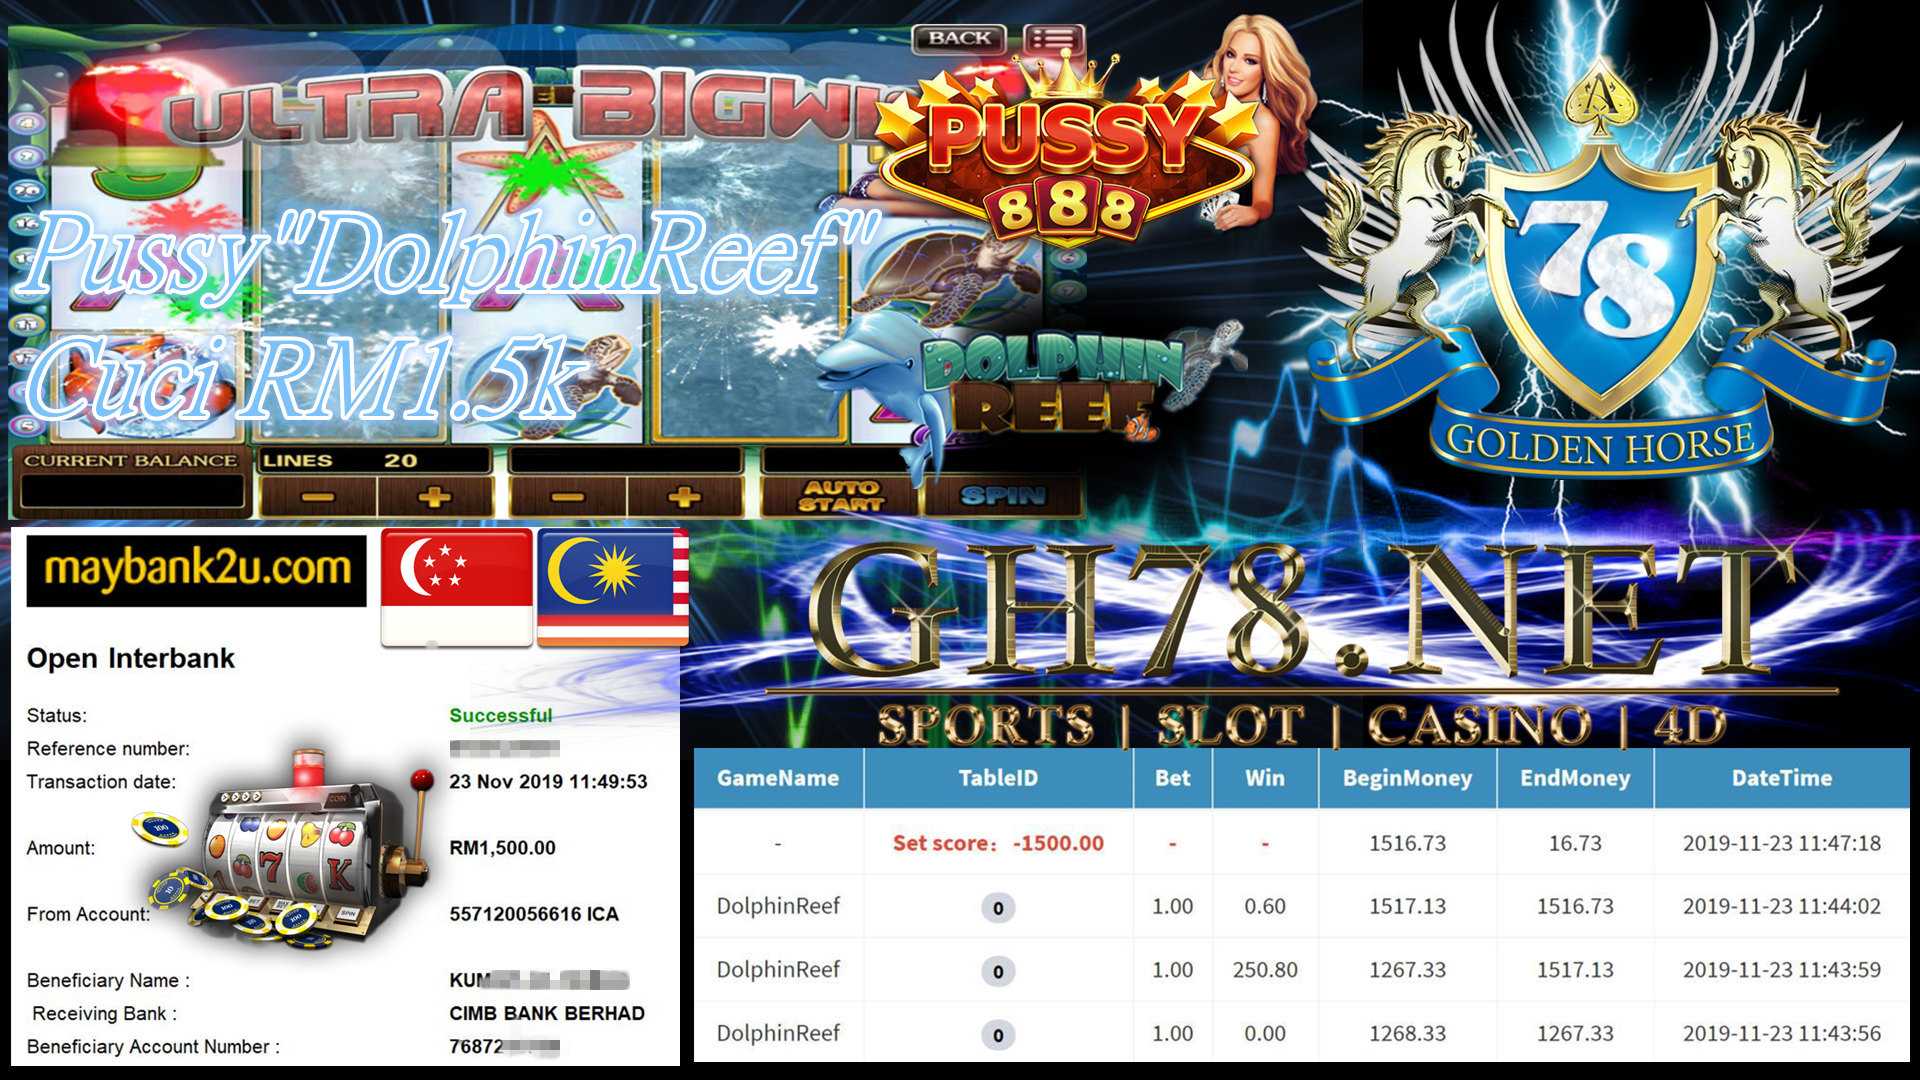 PUSSY888 MAIN DOLPHIN REEF CUCI RM1500 !!